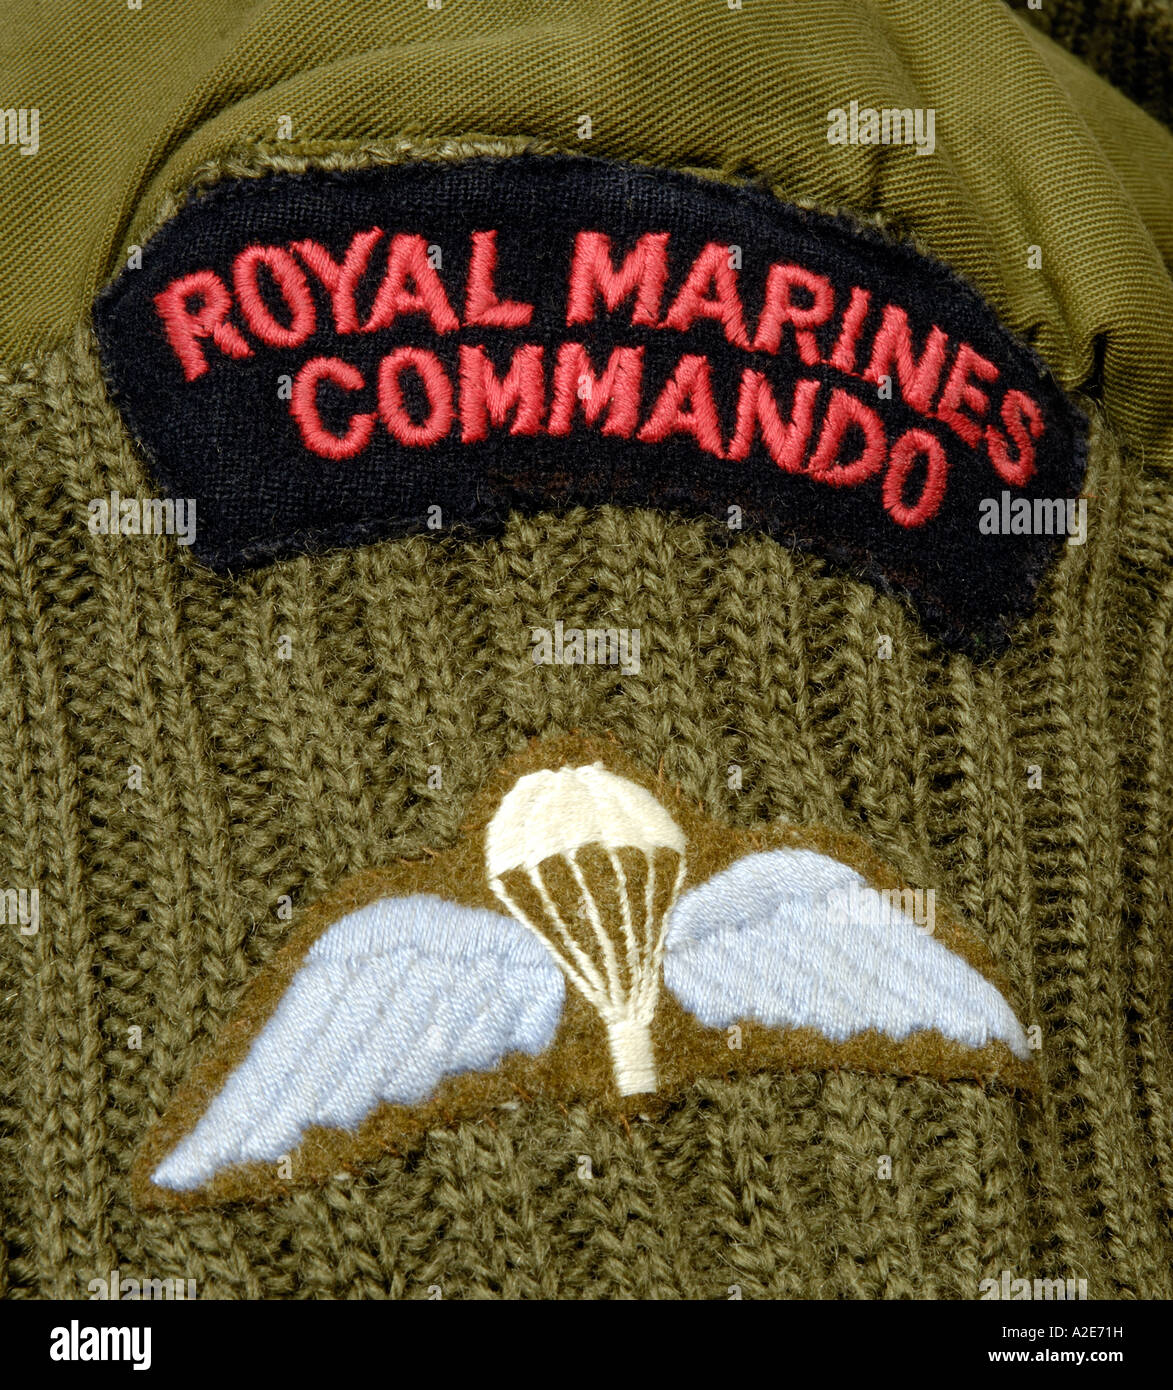 How to find rmro badge in royal marines uniform?